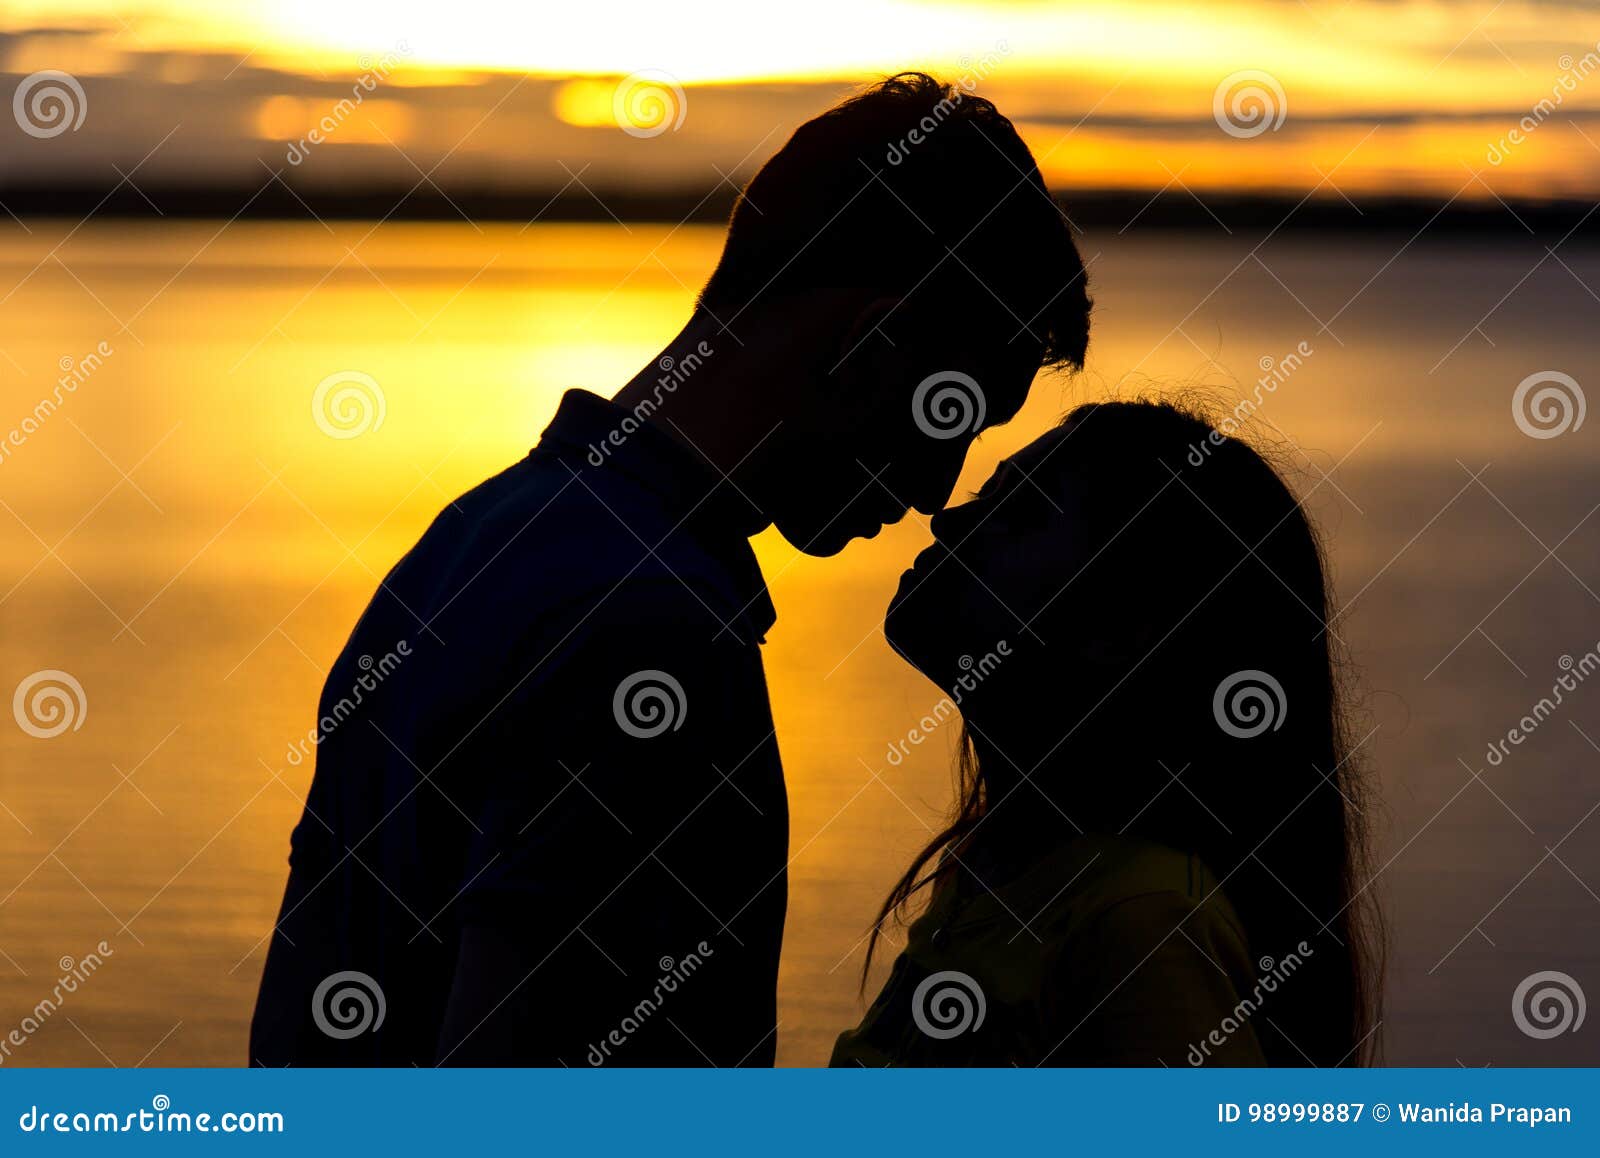 silhouette of happy couple in love kissing romantic at sunset.